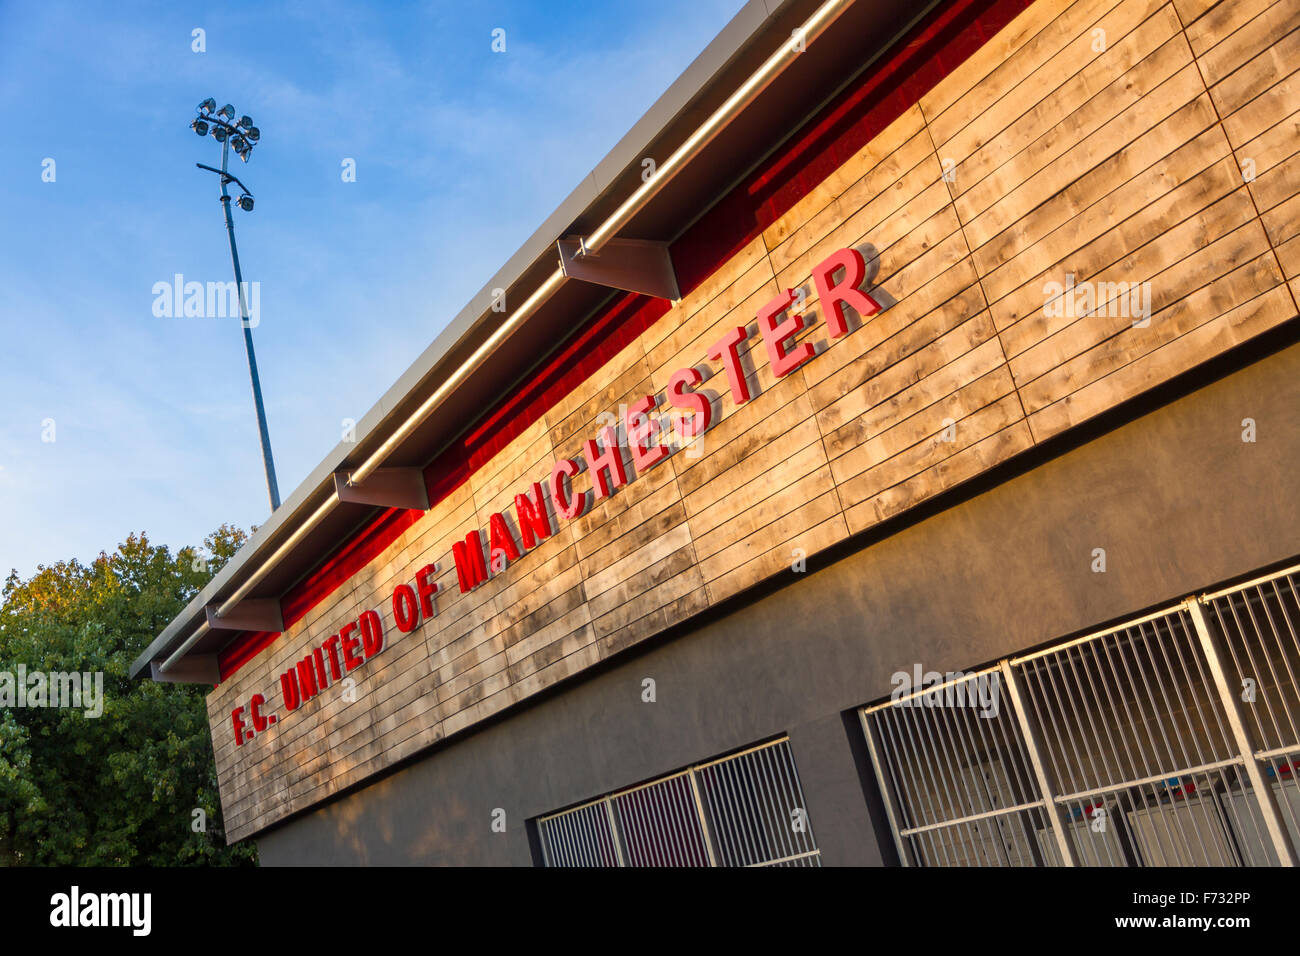 Broashurst Park. The new ground for the football club FC United of Manchester, in Moston, Manchester, England. Stock Photo